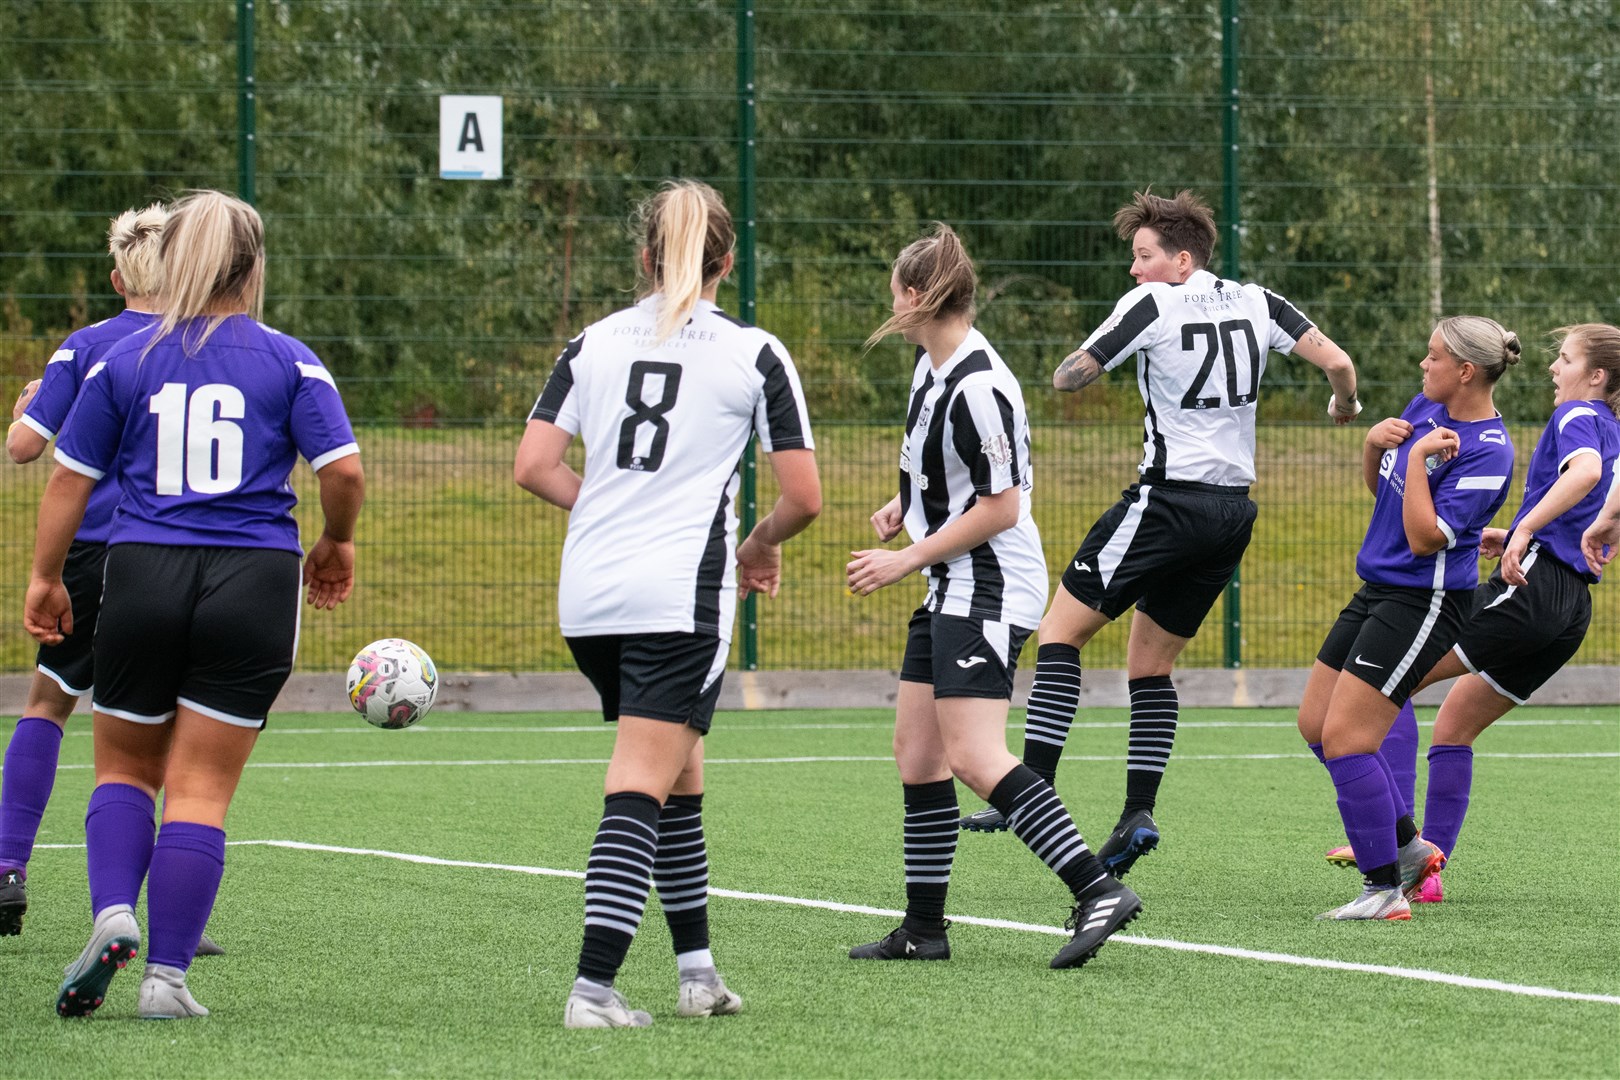 Elgin's Jess Moore scores to make it 4-5 but the City are unable to salvage anything from the match. ..Elgin City (4) vs Buchan LFC (5) - SWFL North 23/24 - Gleaner Arena, Elgin 17/09/2023...Picture: Daniel Forsyth..